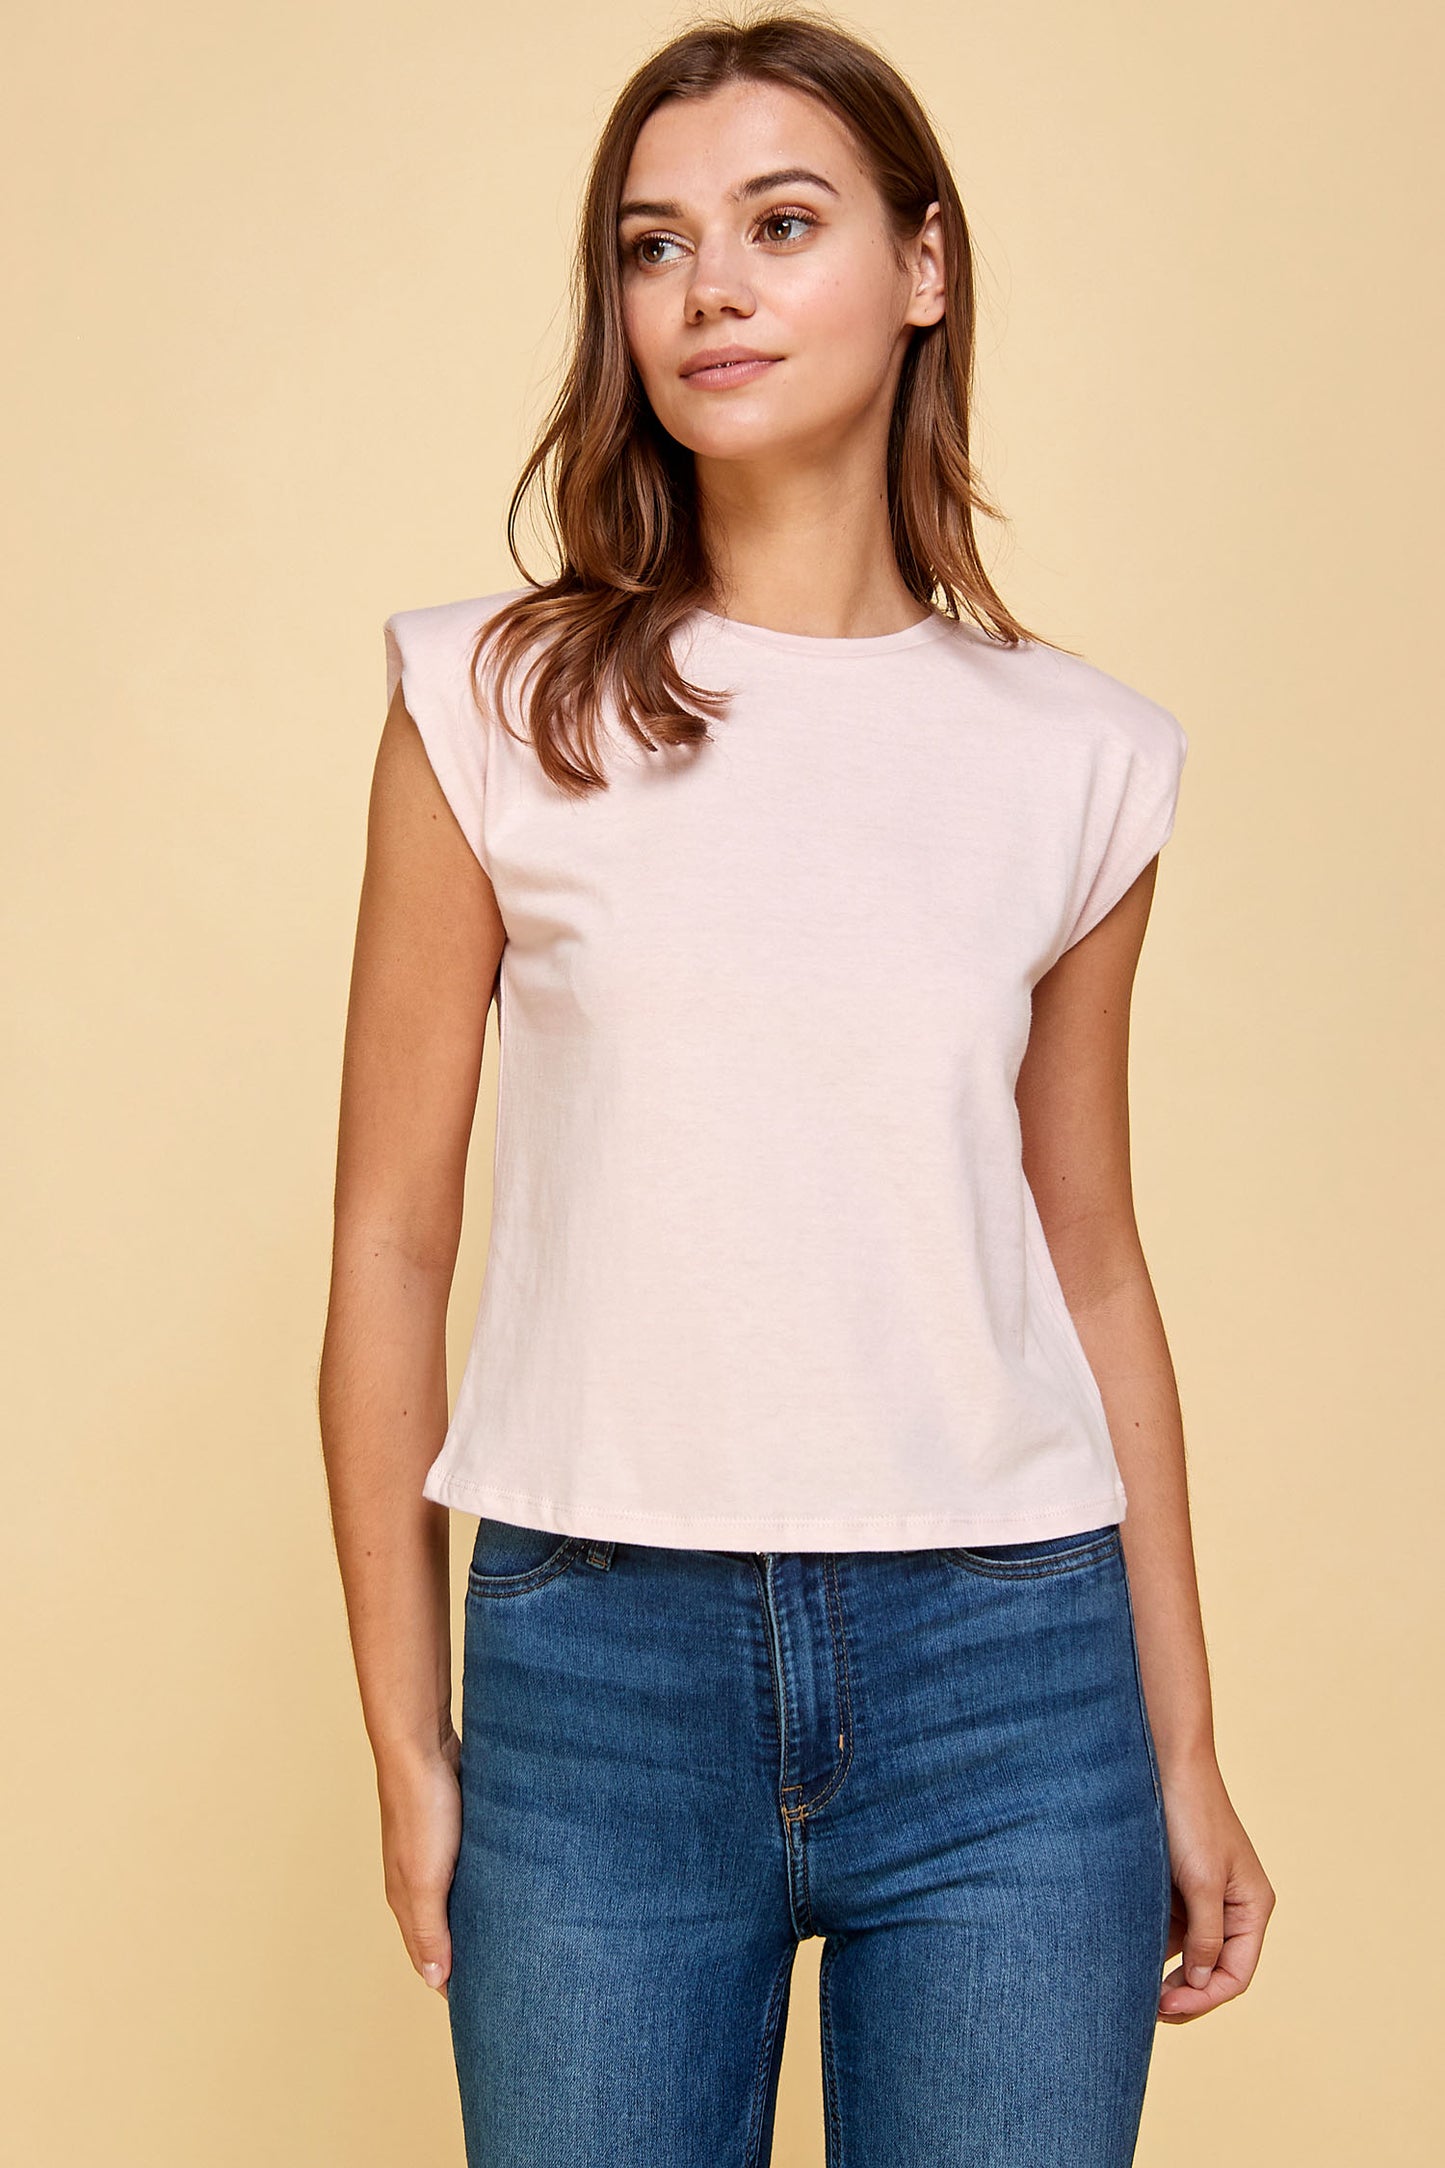 PINK MUSCLE TEE WITH SHOULDER PADS